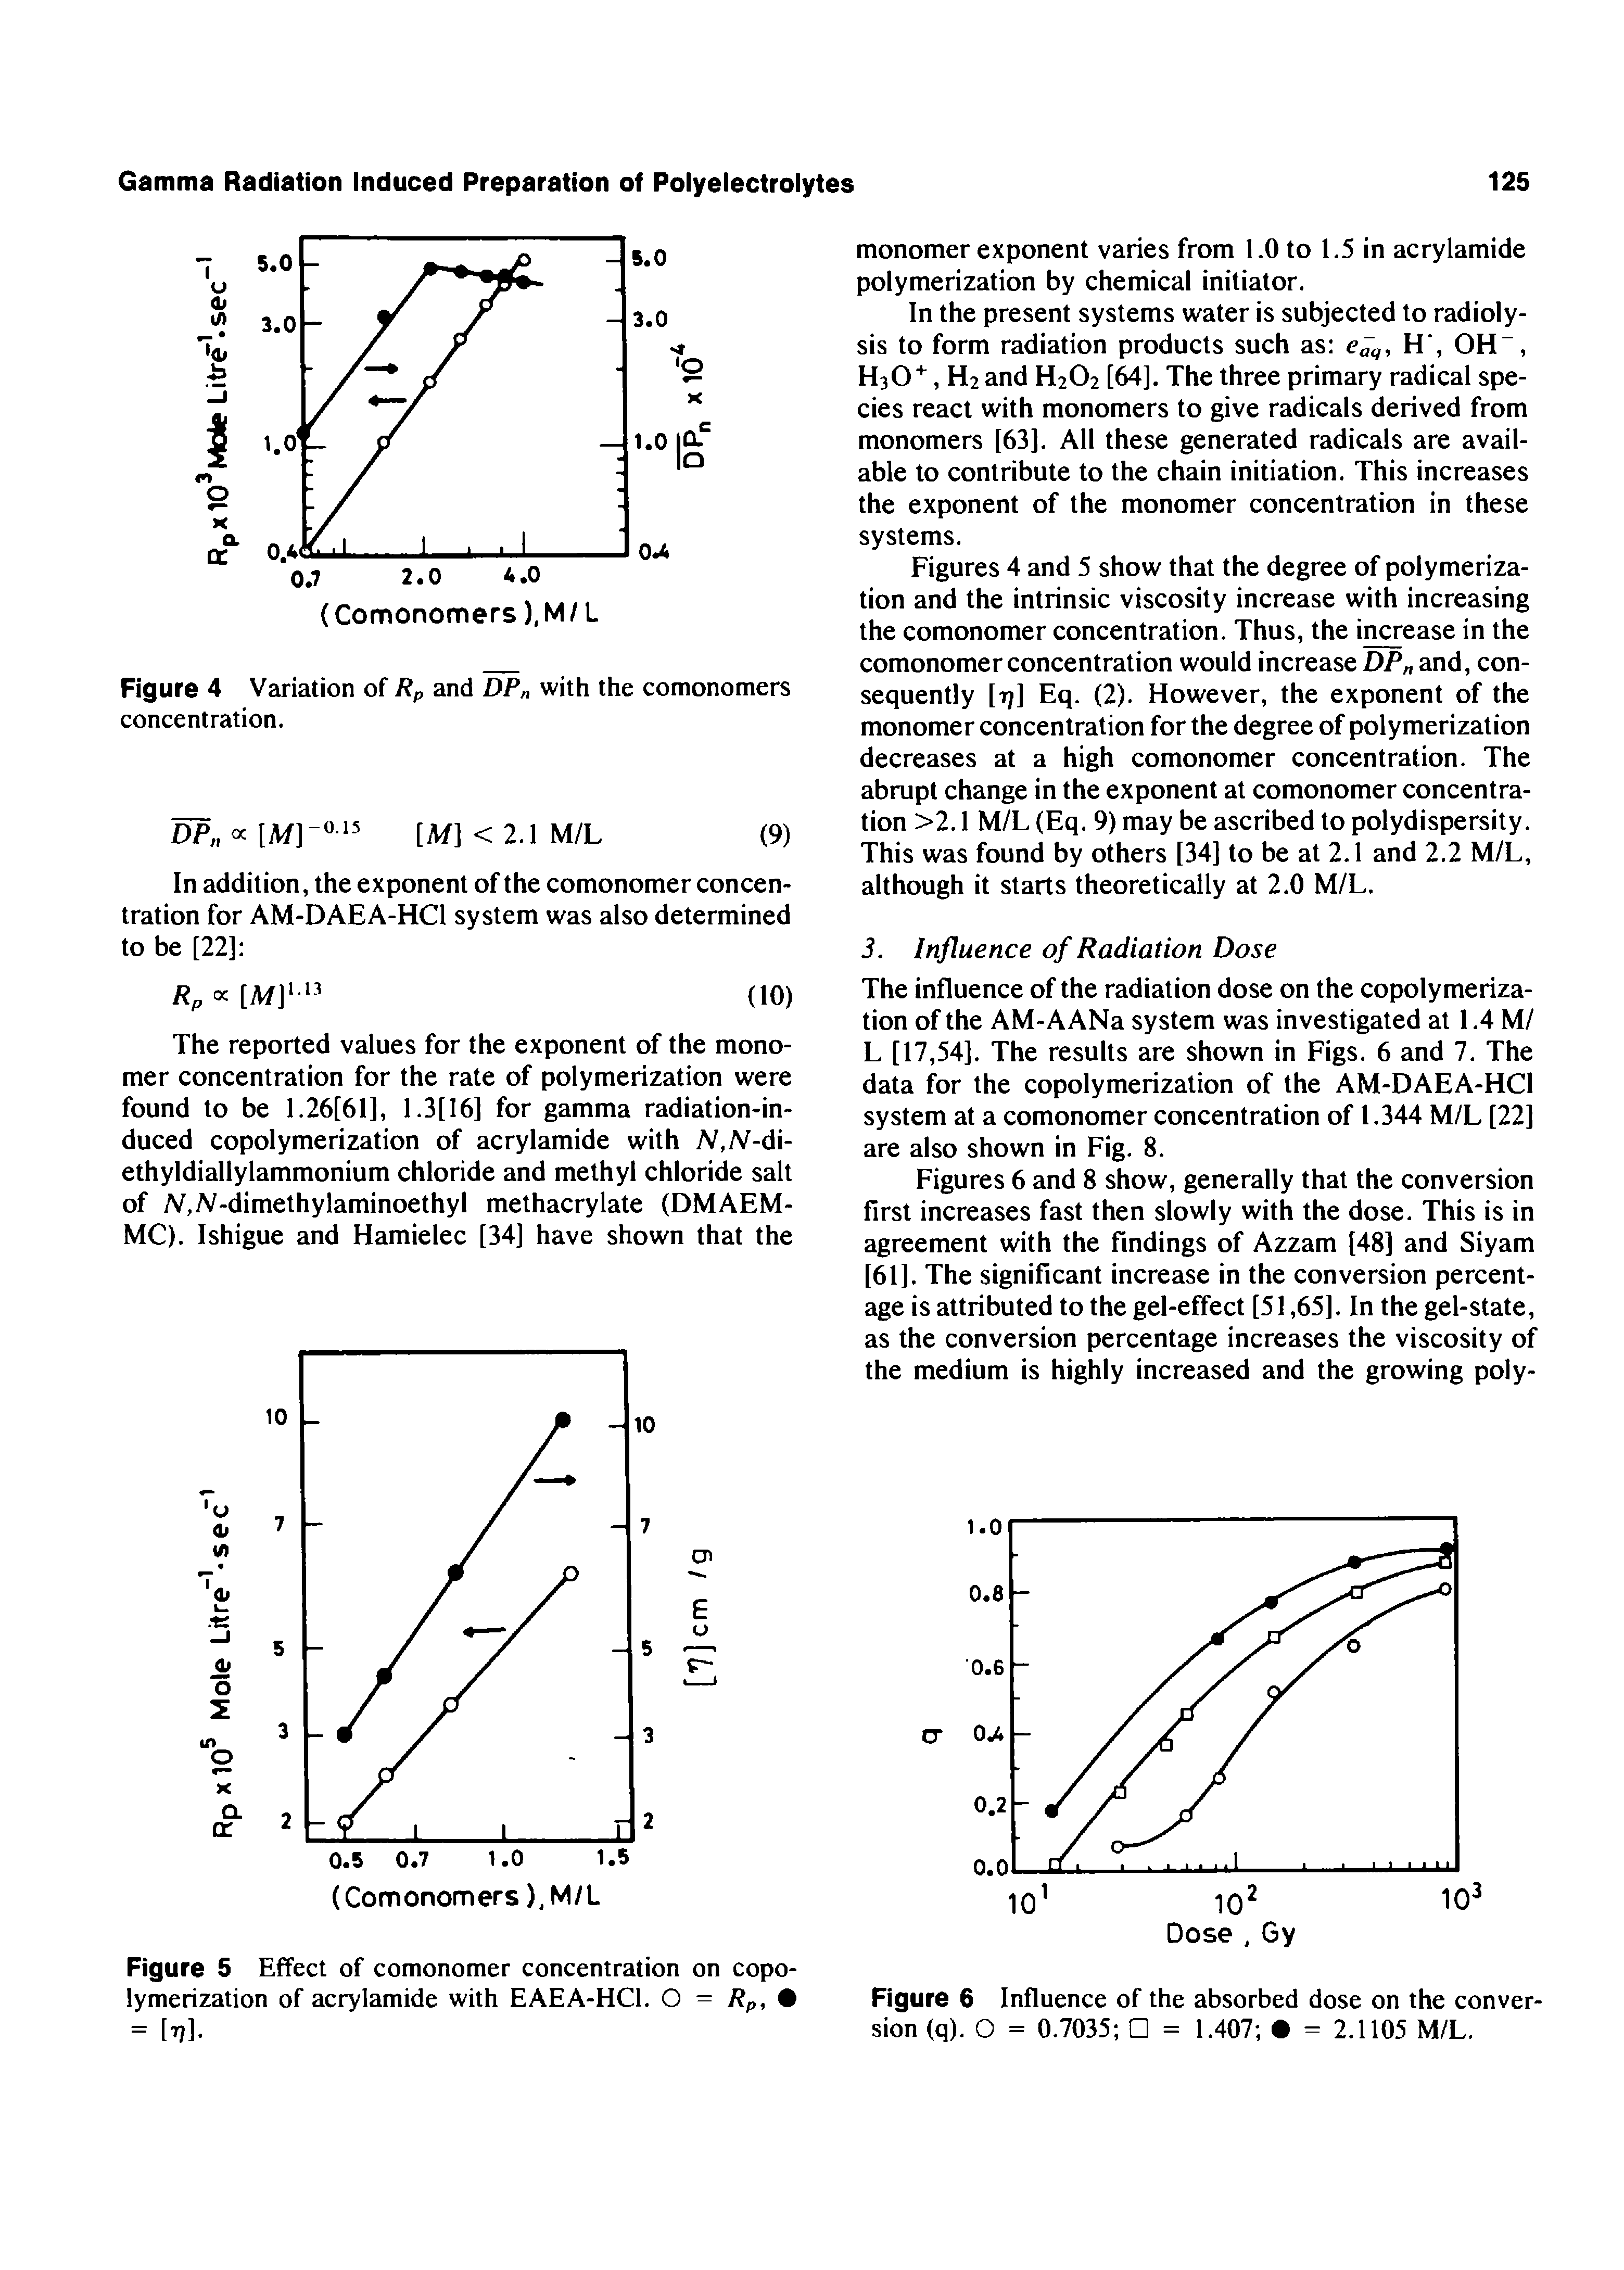 Figures 4 and 5 show that the degree of polymerization and the intrinsic viscosity increase with increasing the comonomer concentration. Thus, the increase in the comonomer concentration would increase DP and, consequently [rj] Eq. (2). However, the exponent of the monomer concentration for the degree of polymerization decreases at a high comonomer concentration. The abrupt change in the exponent at comonomer concentration >2.1 M/L (Eq. 9) may be ascribed to polydispersity. This was found by others [34] to be at 2.1 and 2.2 M/L, although it starts theoretically at 2.0 M/L.